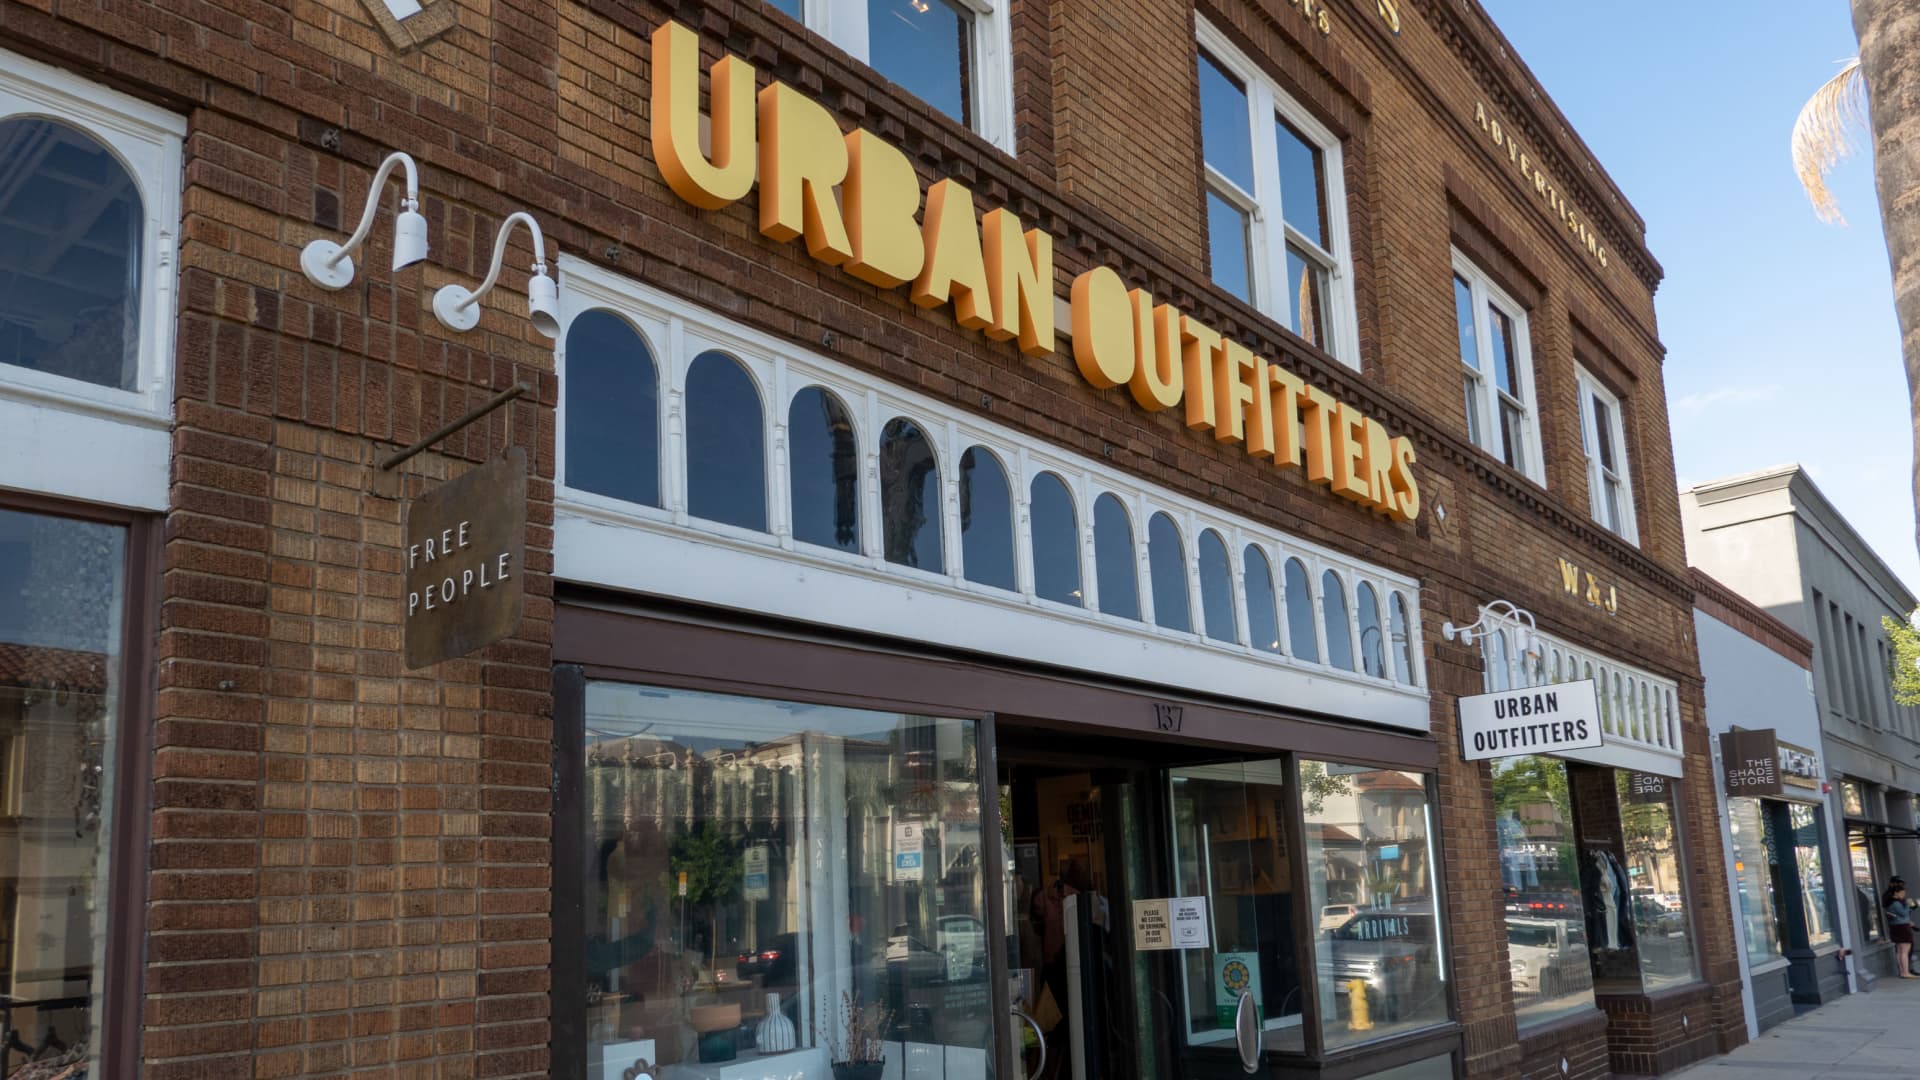 PASADENA, CA - MAY 22: Exterior view of Urban Outfitters signage is seen on May 22, 2021 in Pasadena, California.(Photo by RBL/Bauer-Griffin/GC Images)